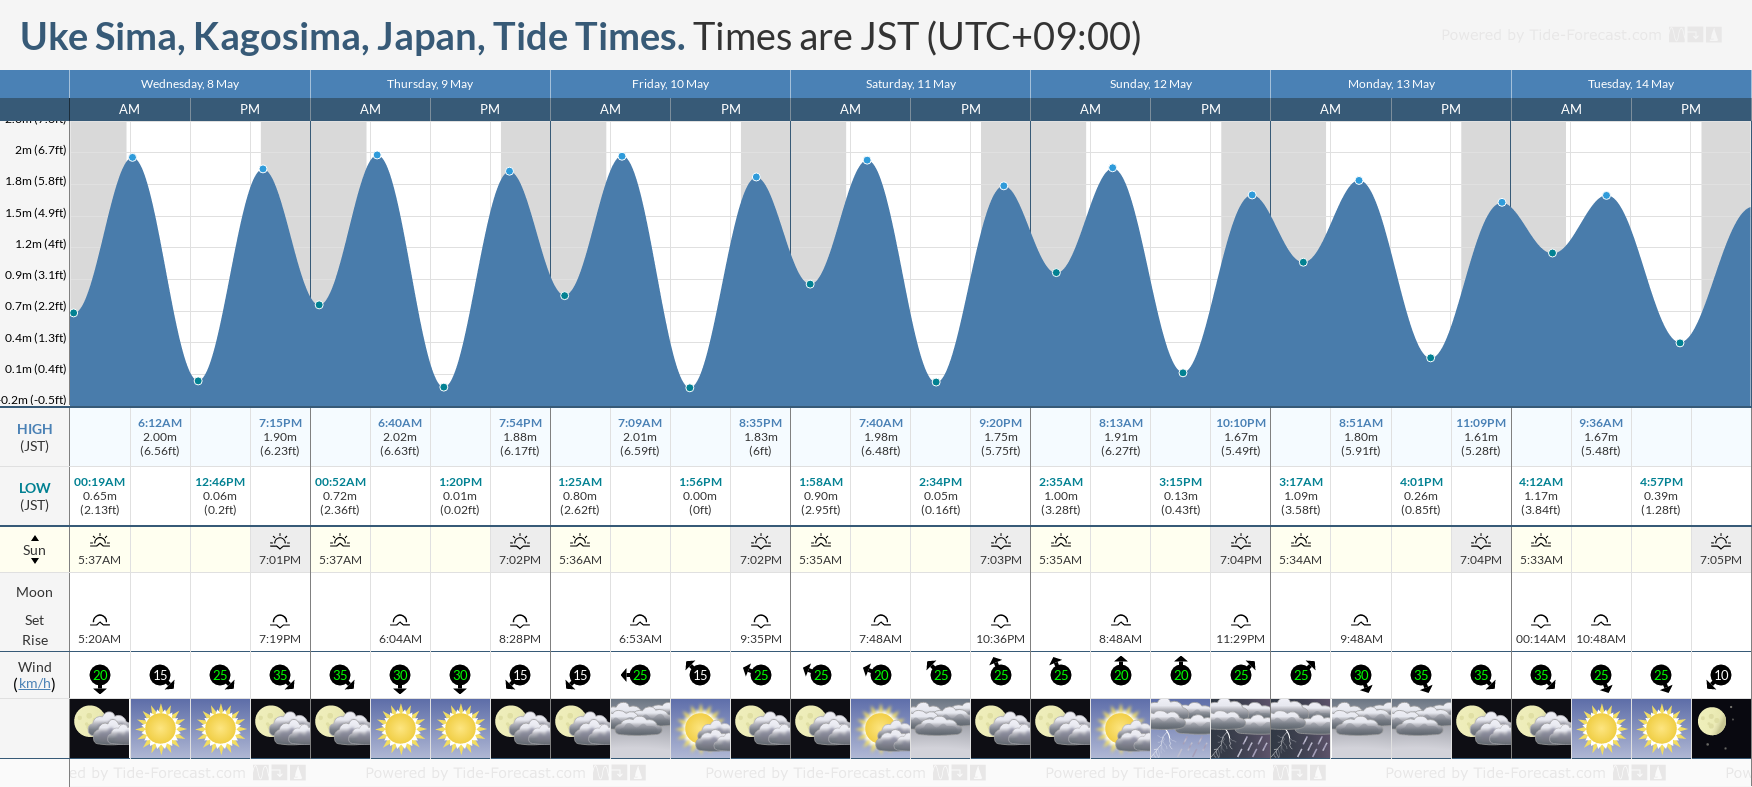 Uke Sima, Kagosima, Japan Tide Chart including high and low tide tide times for the next 7 days